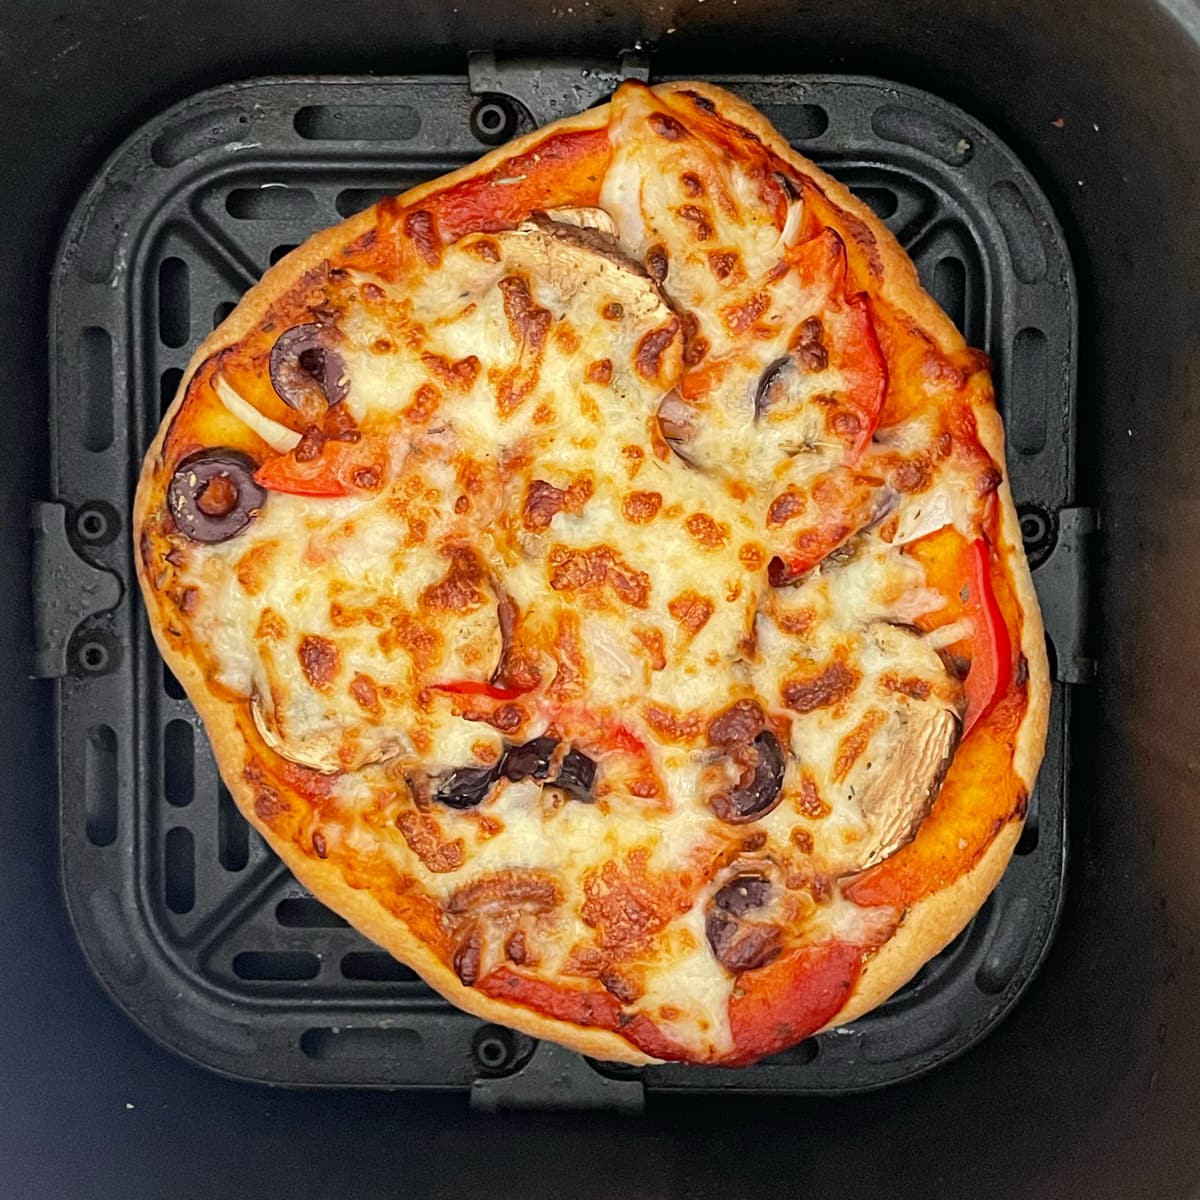 Air fryer baked pizza.